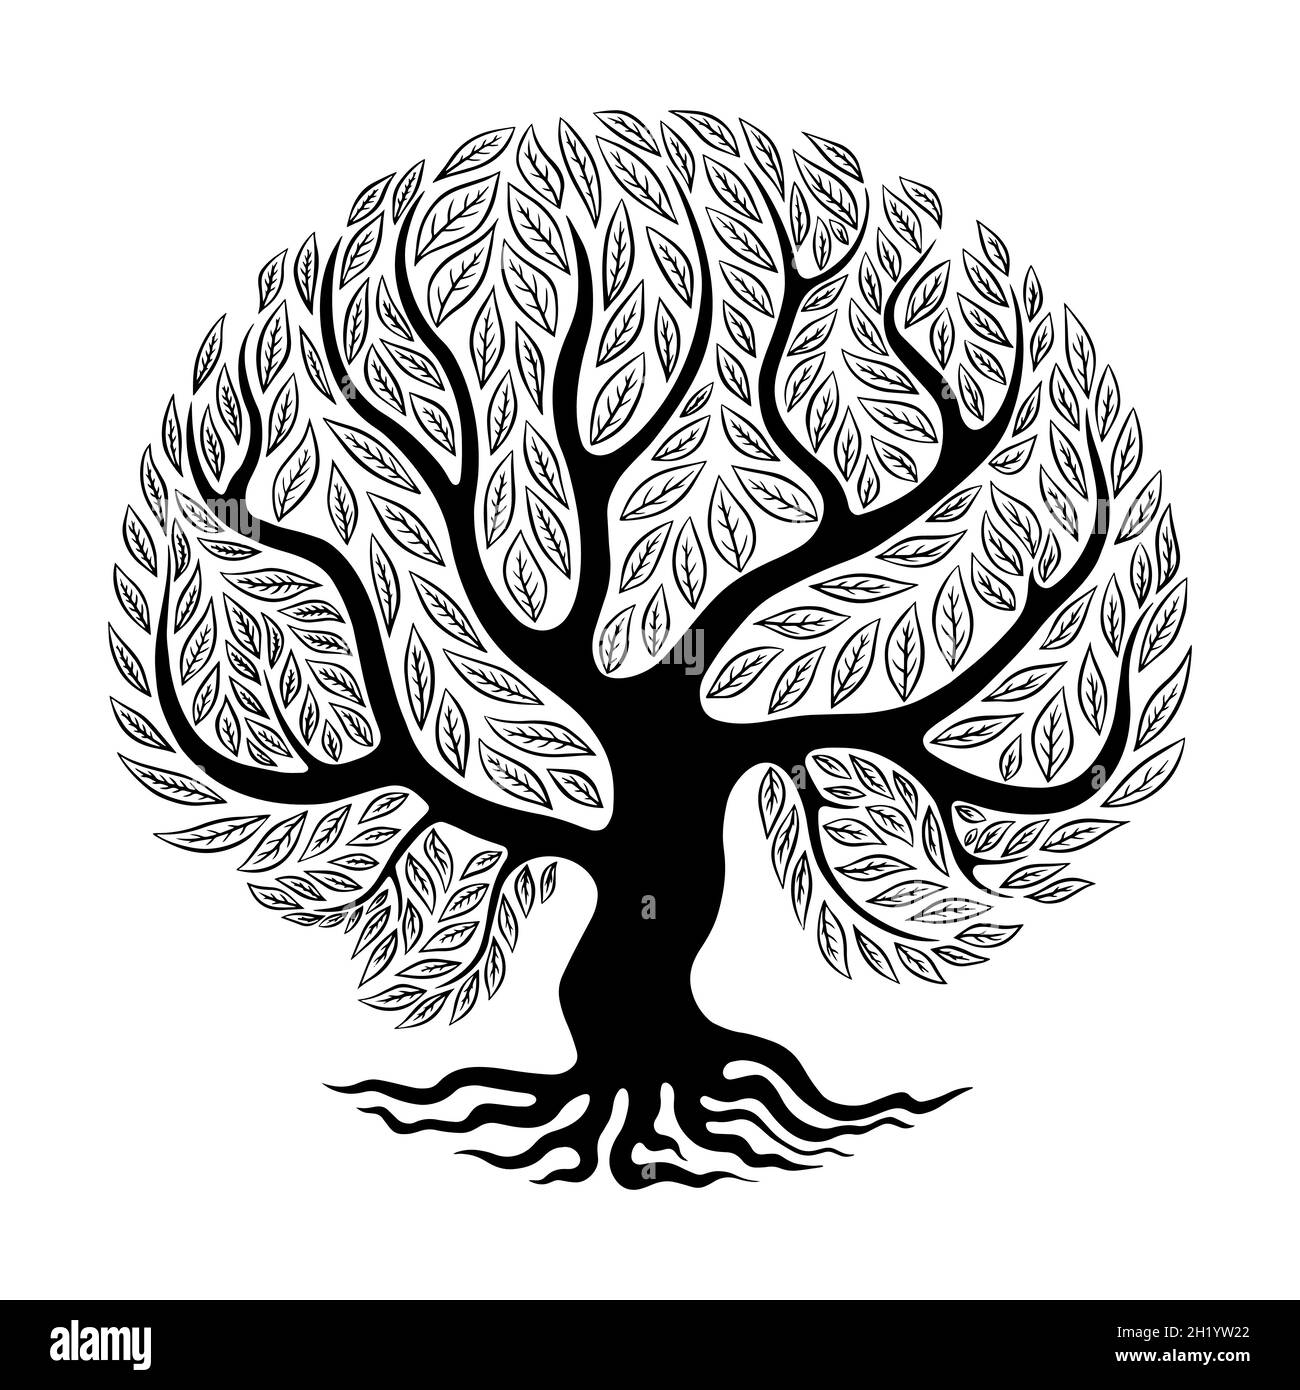 The whole tree silhouette with branches, leaves ant roots. Circle shape isolated on white background. Vector illustration. Stock Vector